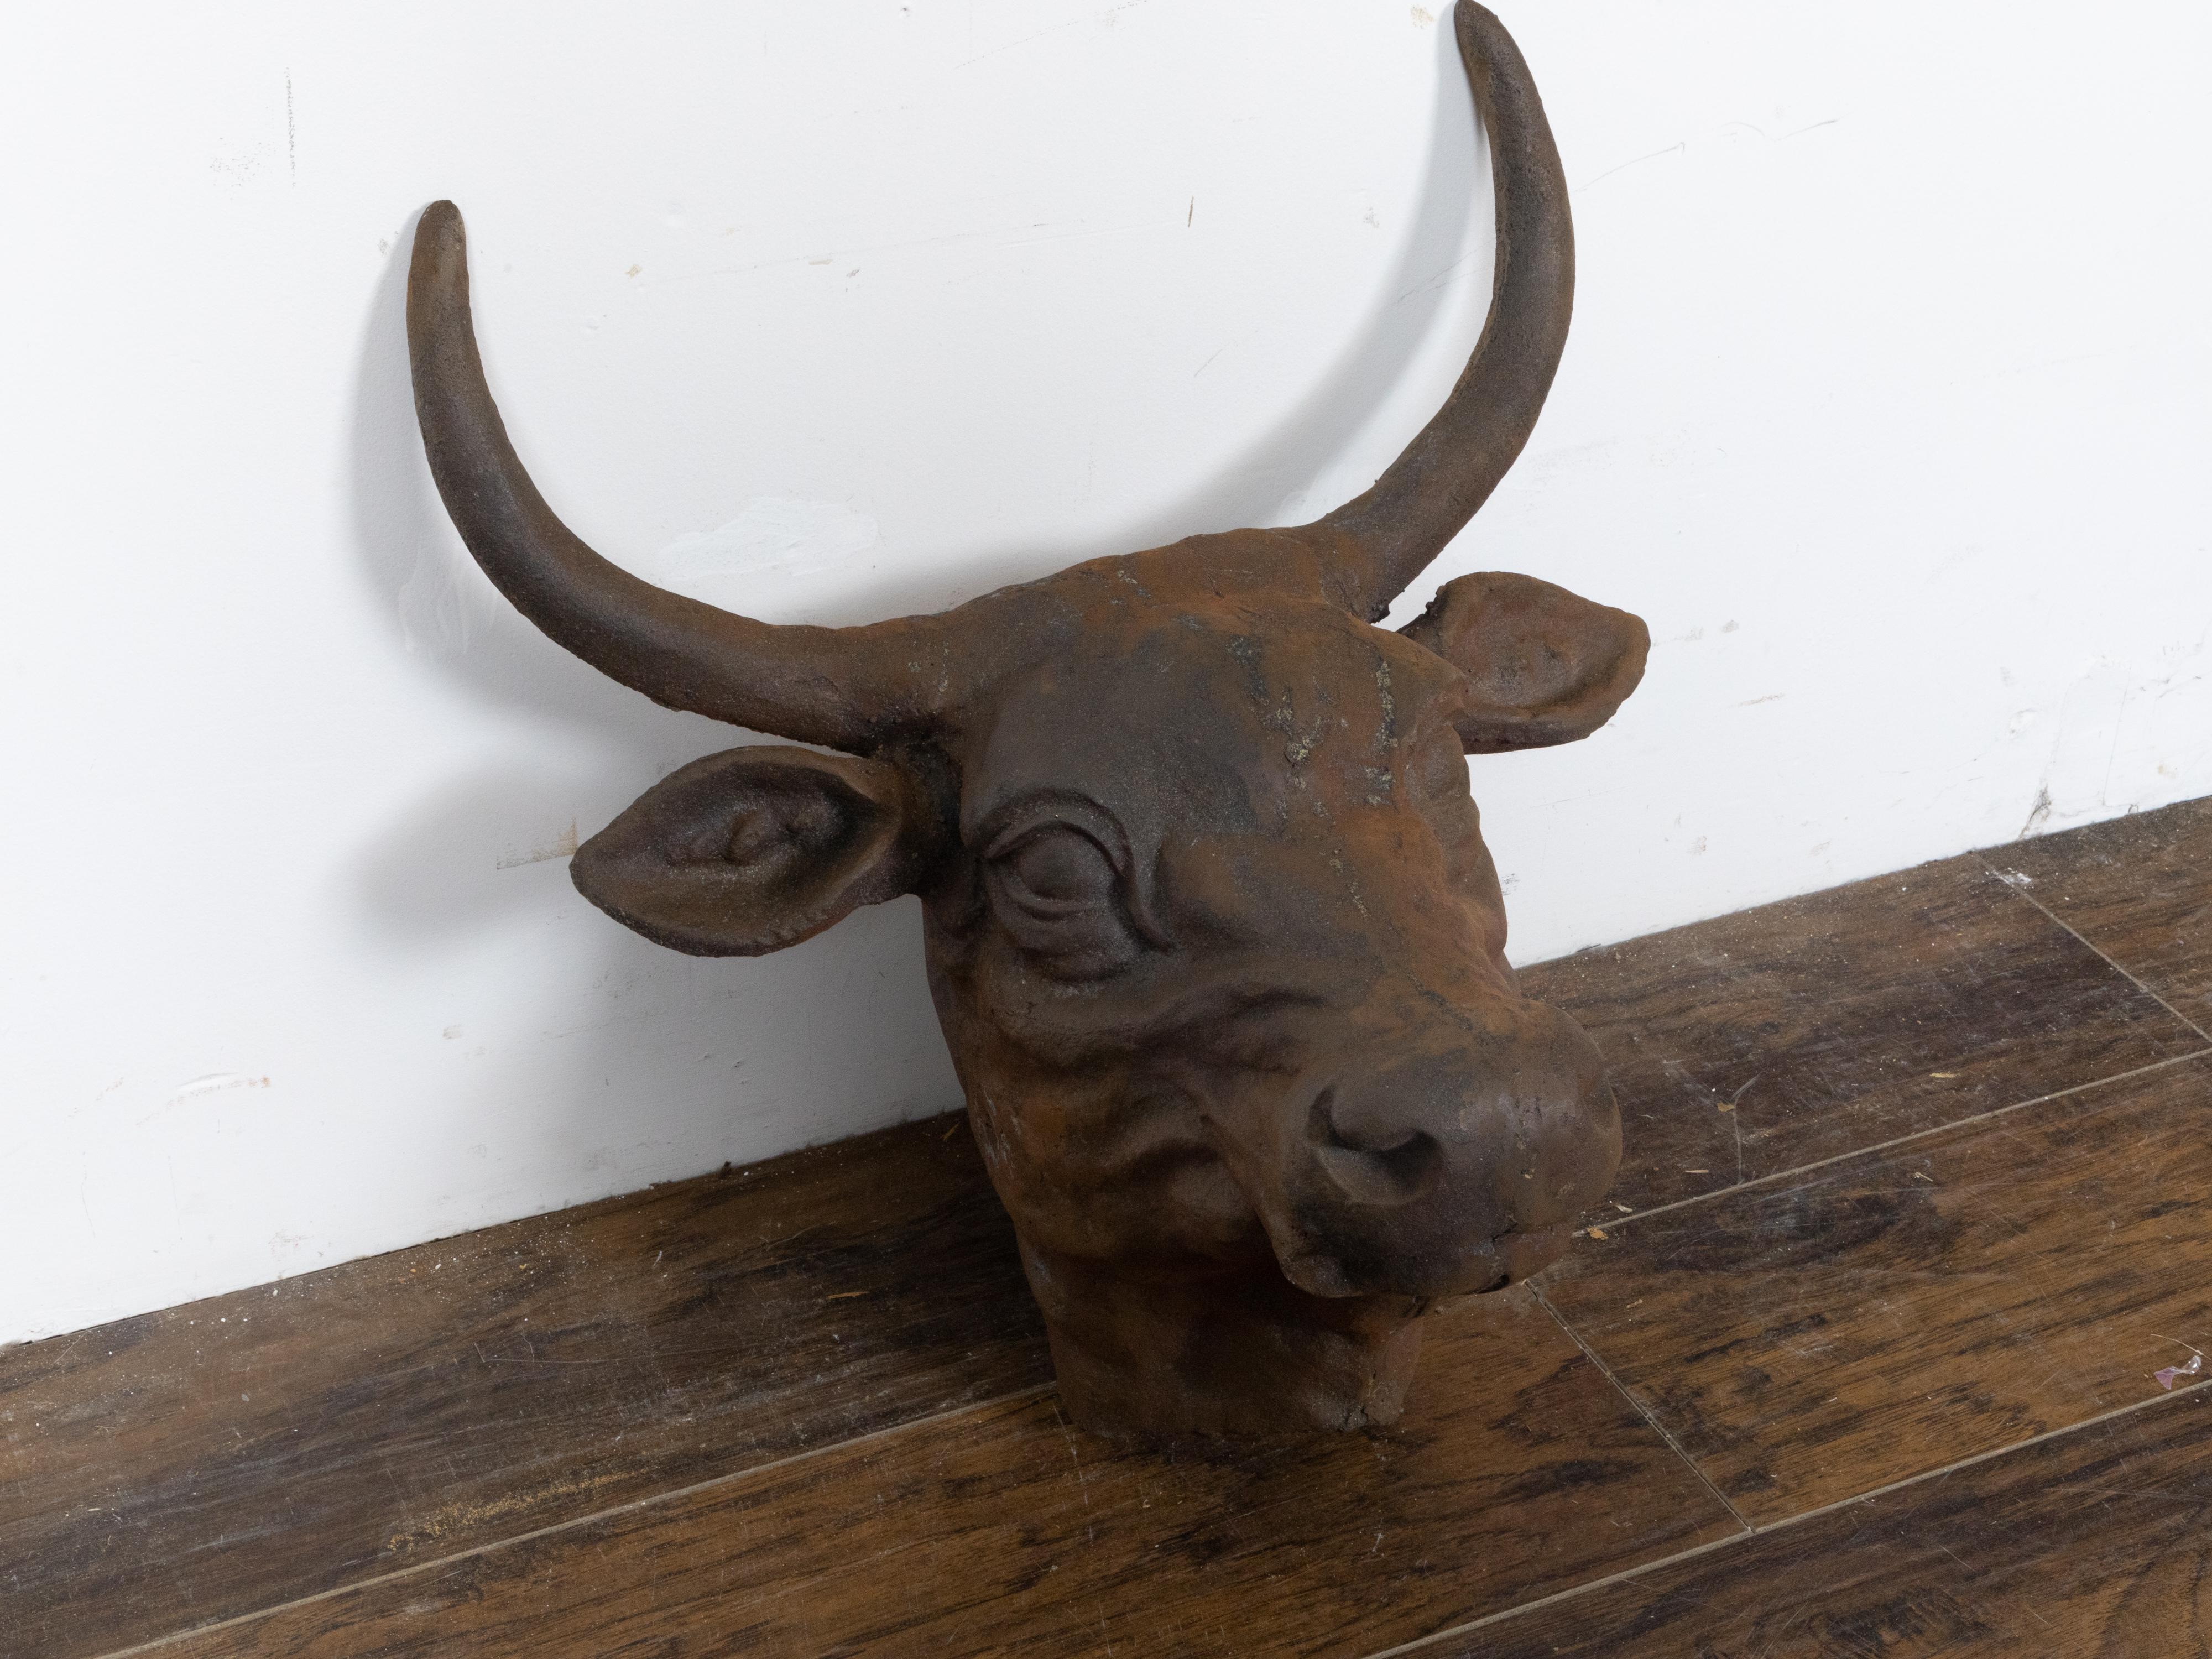 English 1930s-1940s Cast Iron Bull Wall Hanging Sculpture with Rusty Patina In Good Condition For Sale In Atlanta, GA